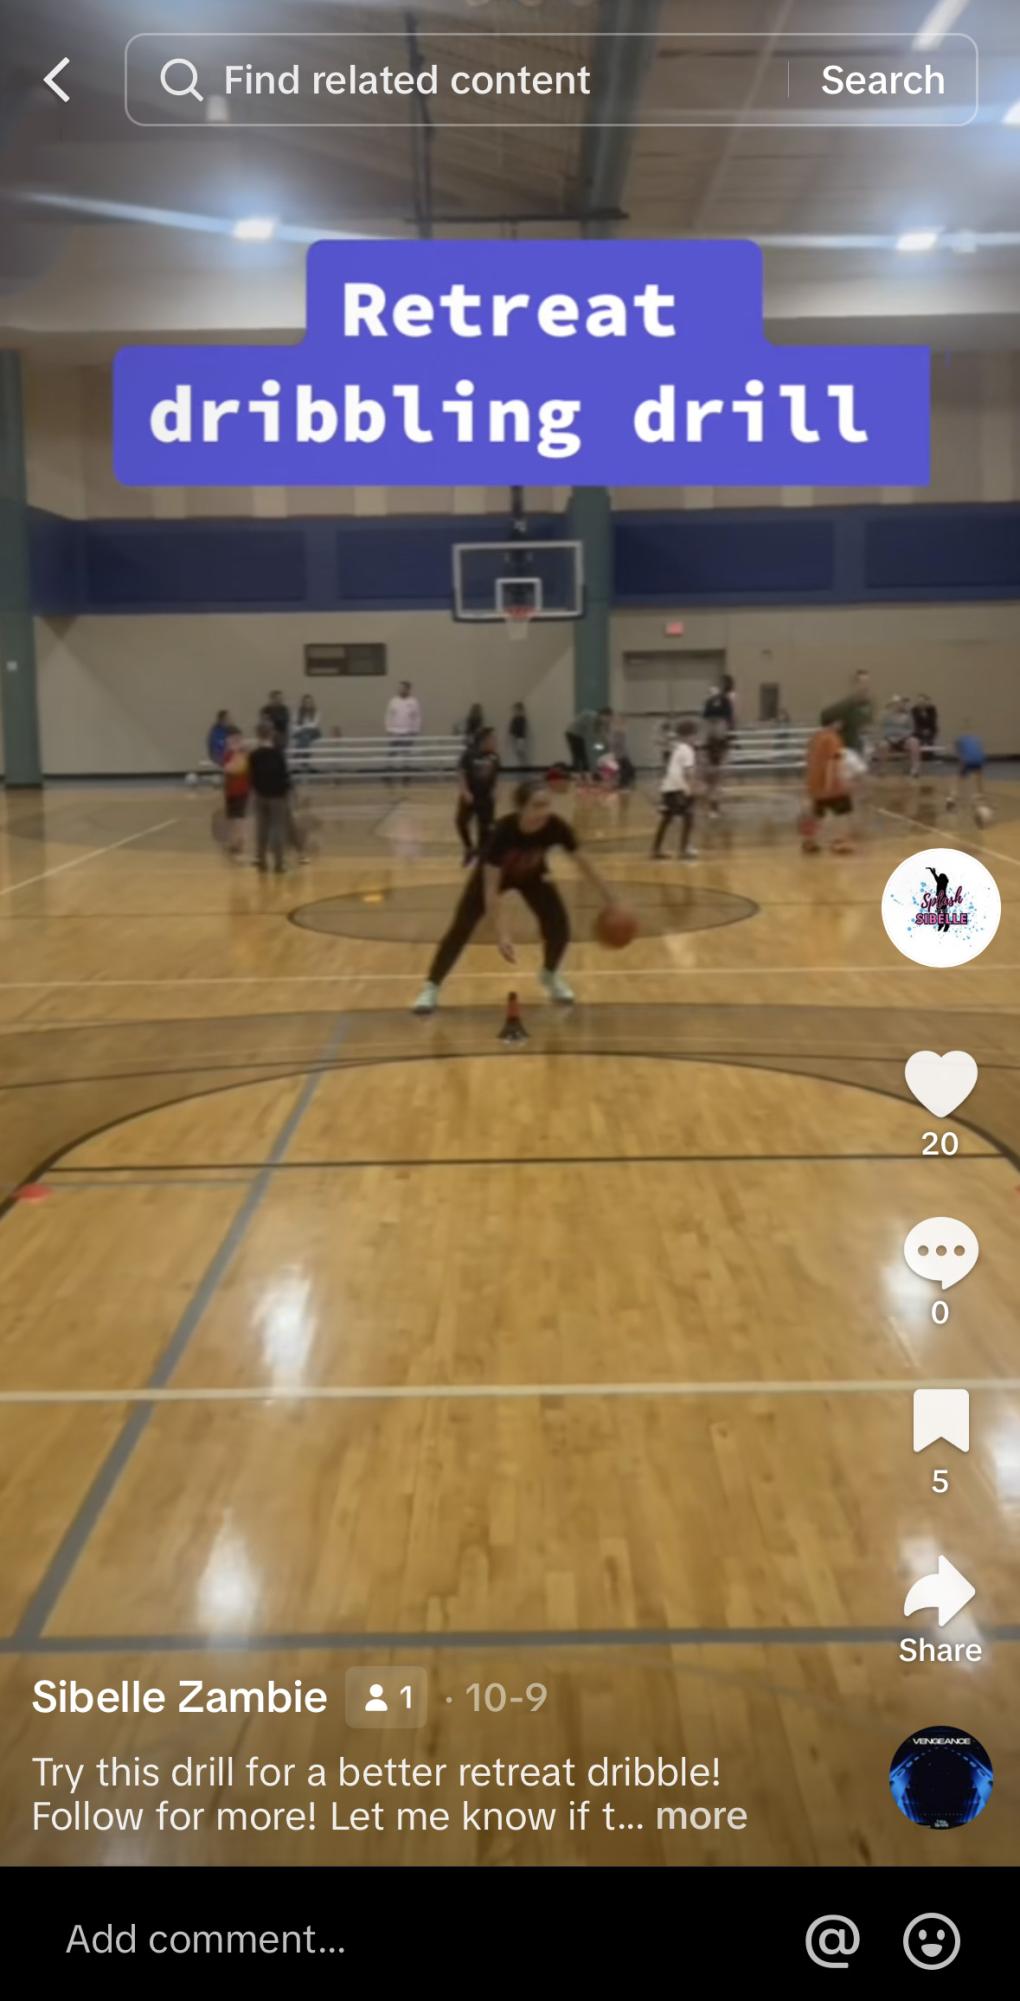 One of senior Sibelle Zambies TikTok posts includes a clip of her showing how to do a basketball practice drill related to retreat dribbling. Image from splashwithsibelle on TikTok.